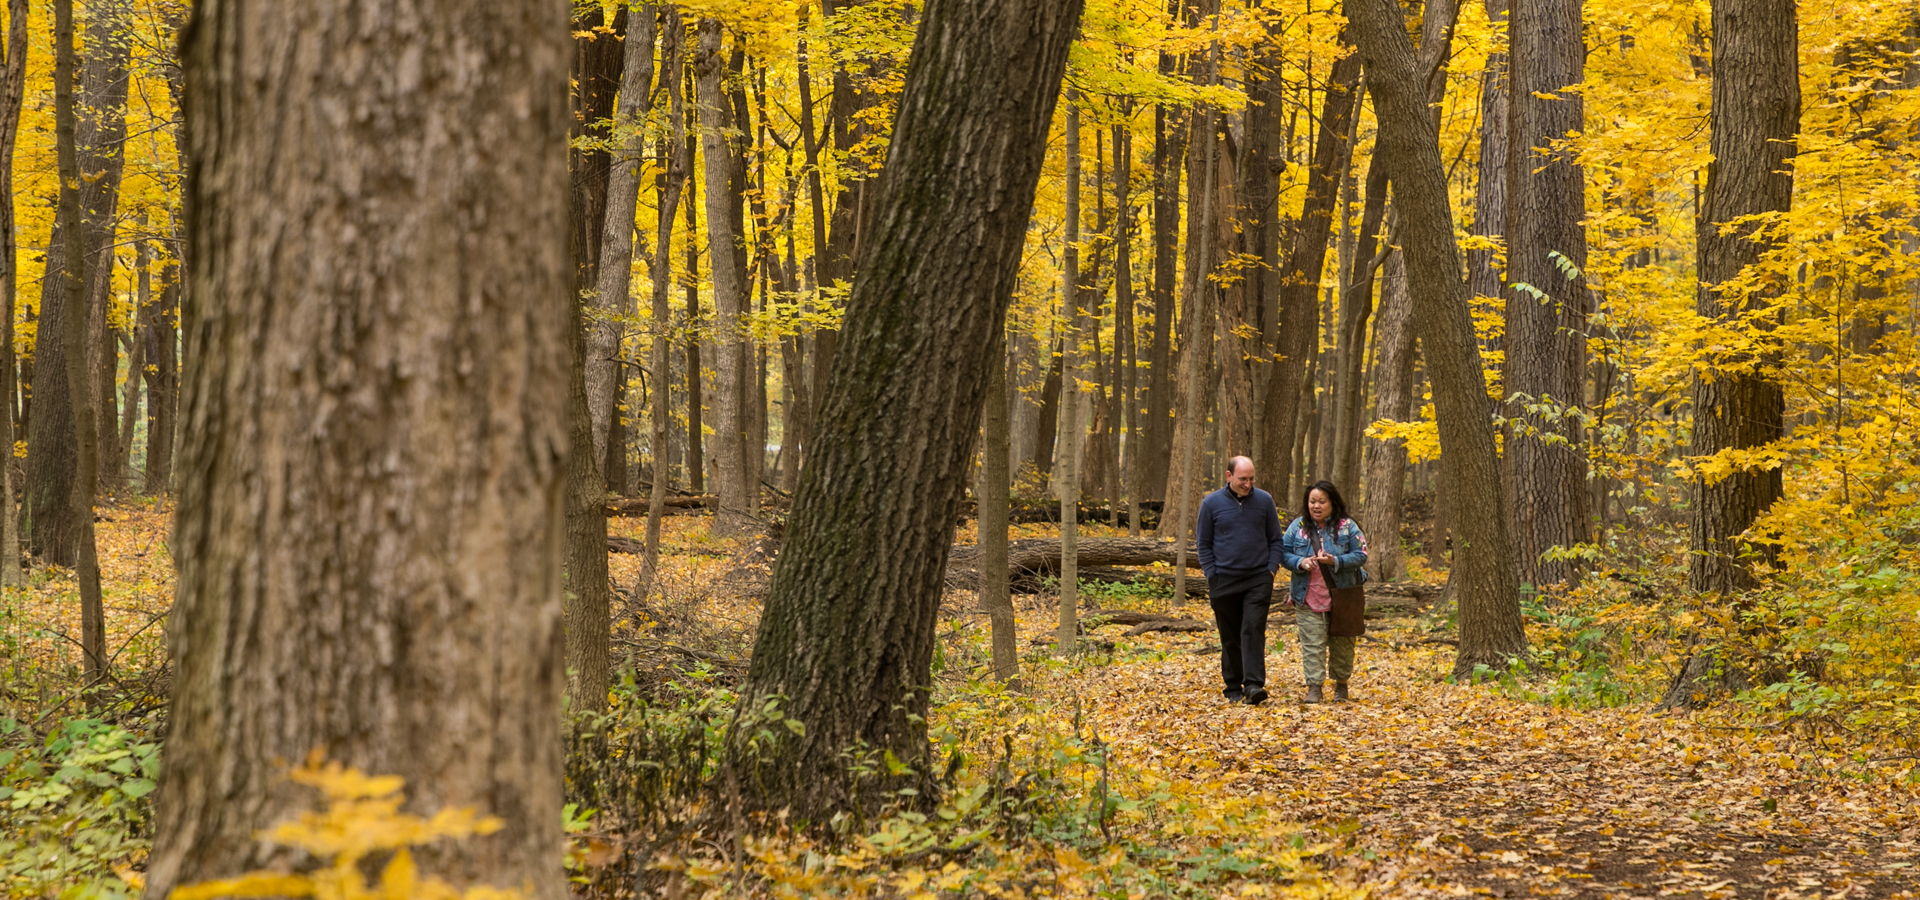 Couple hikes among the bright yellow Sugar Maples in fall.